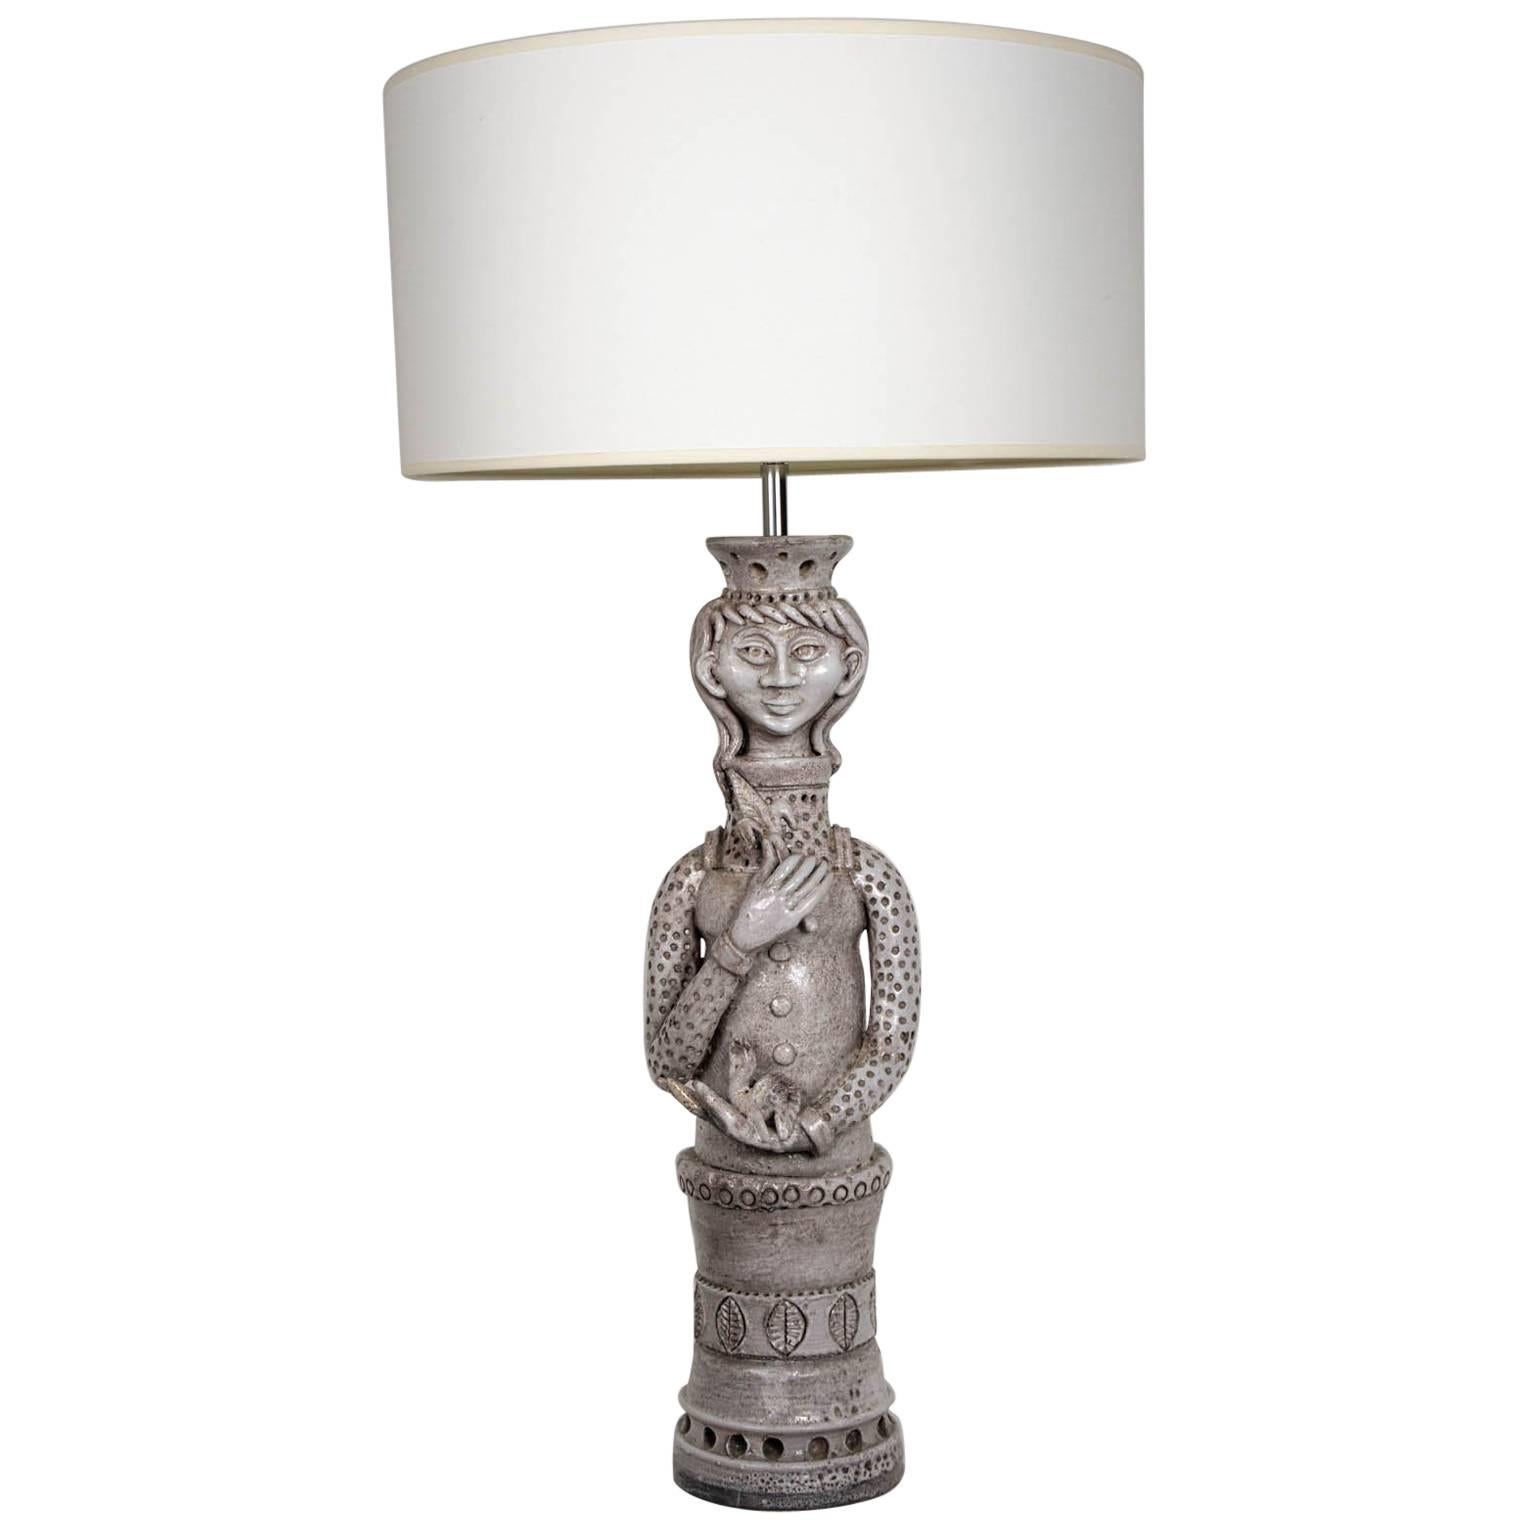 "Queen" Lamp by Ceramist André Marchal For Sale